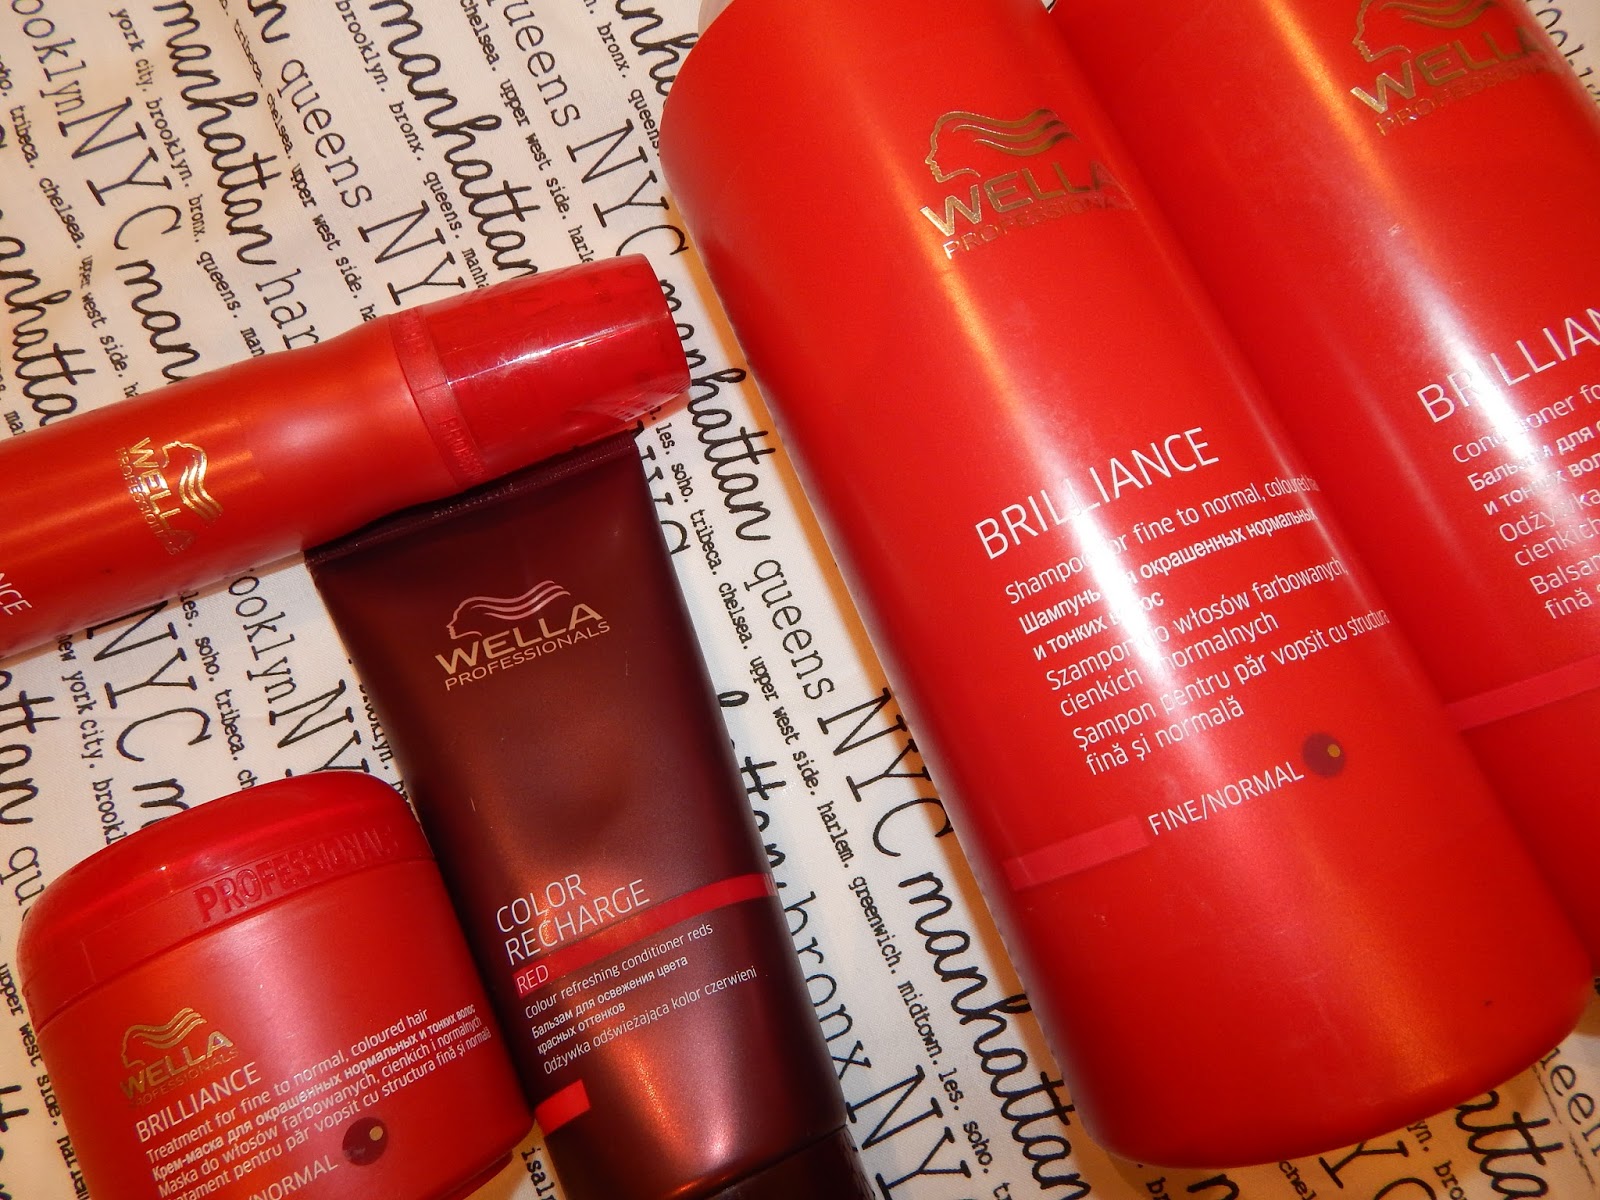 Wella Brilliance A Range Maintains Red Hair. - She Be Loved